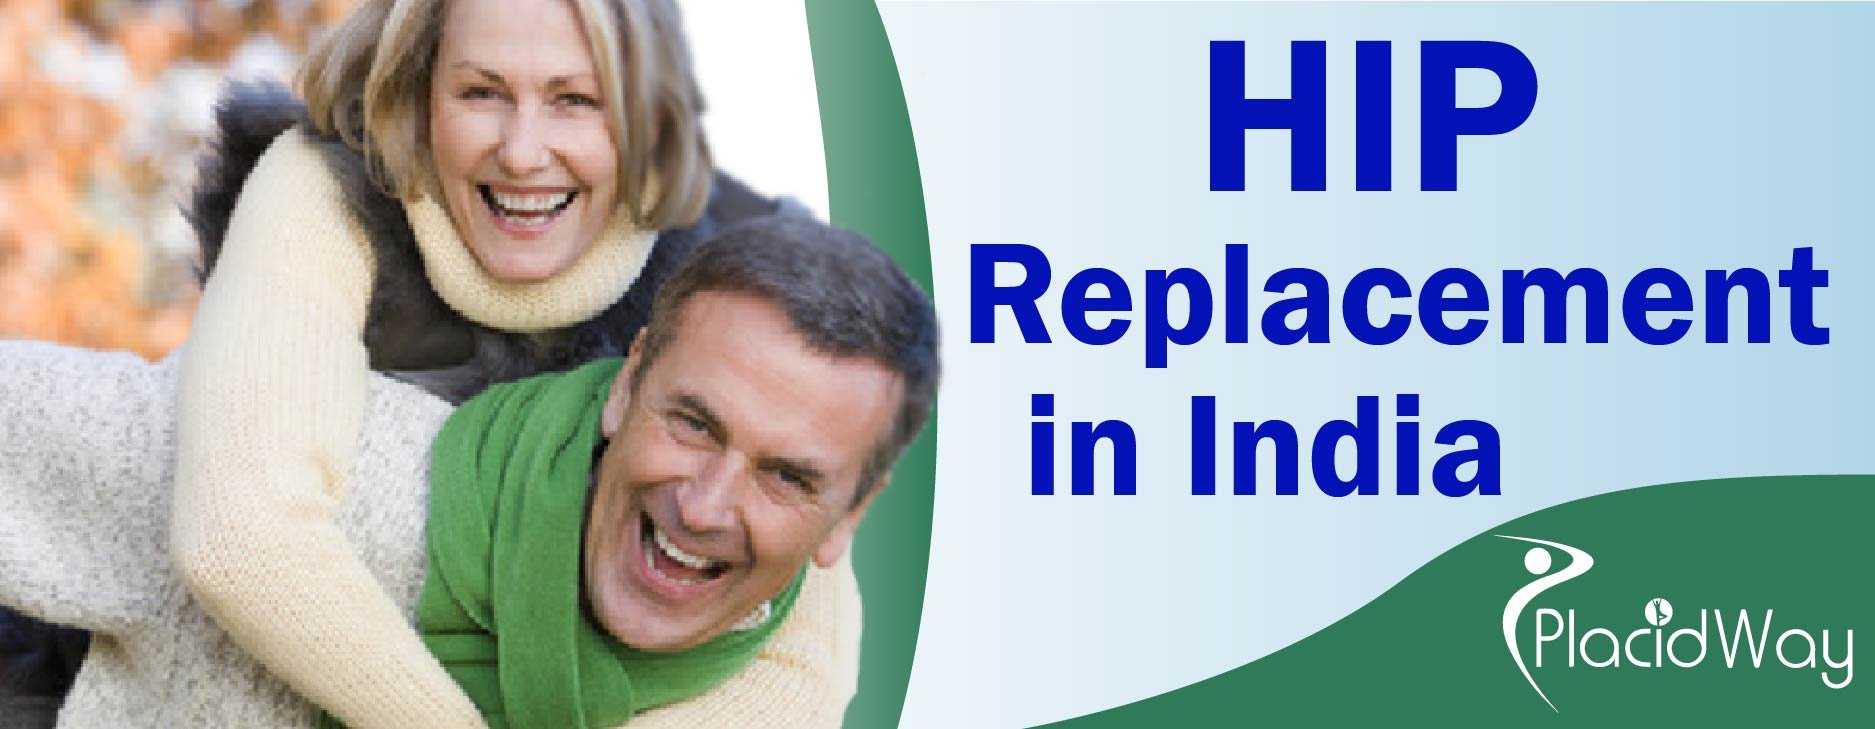 Joint Replacement Surgery, Hip Replacement Treatment